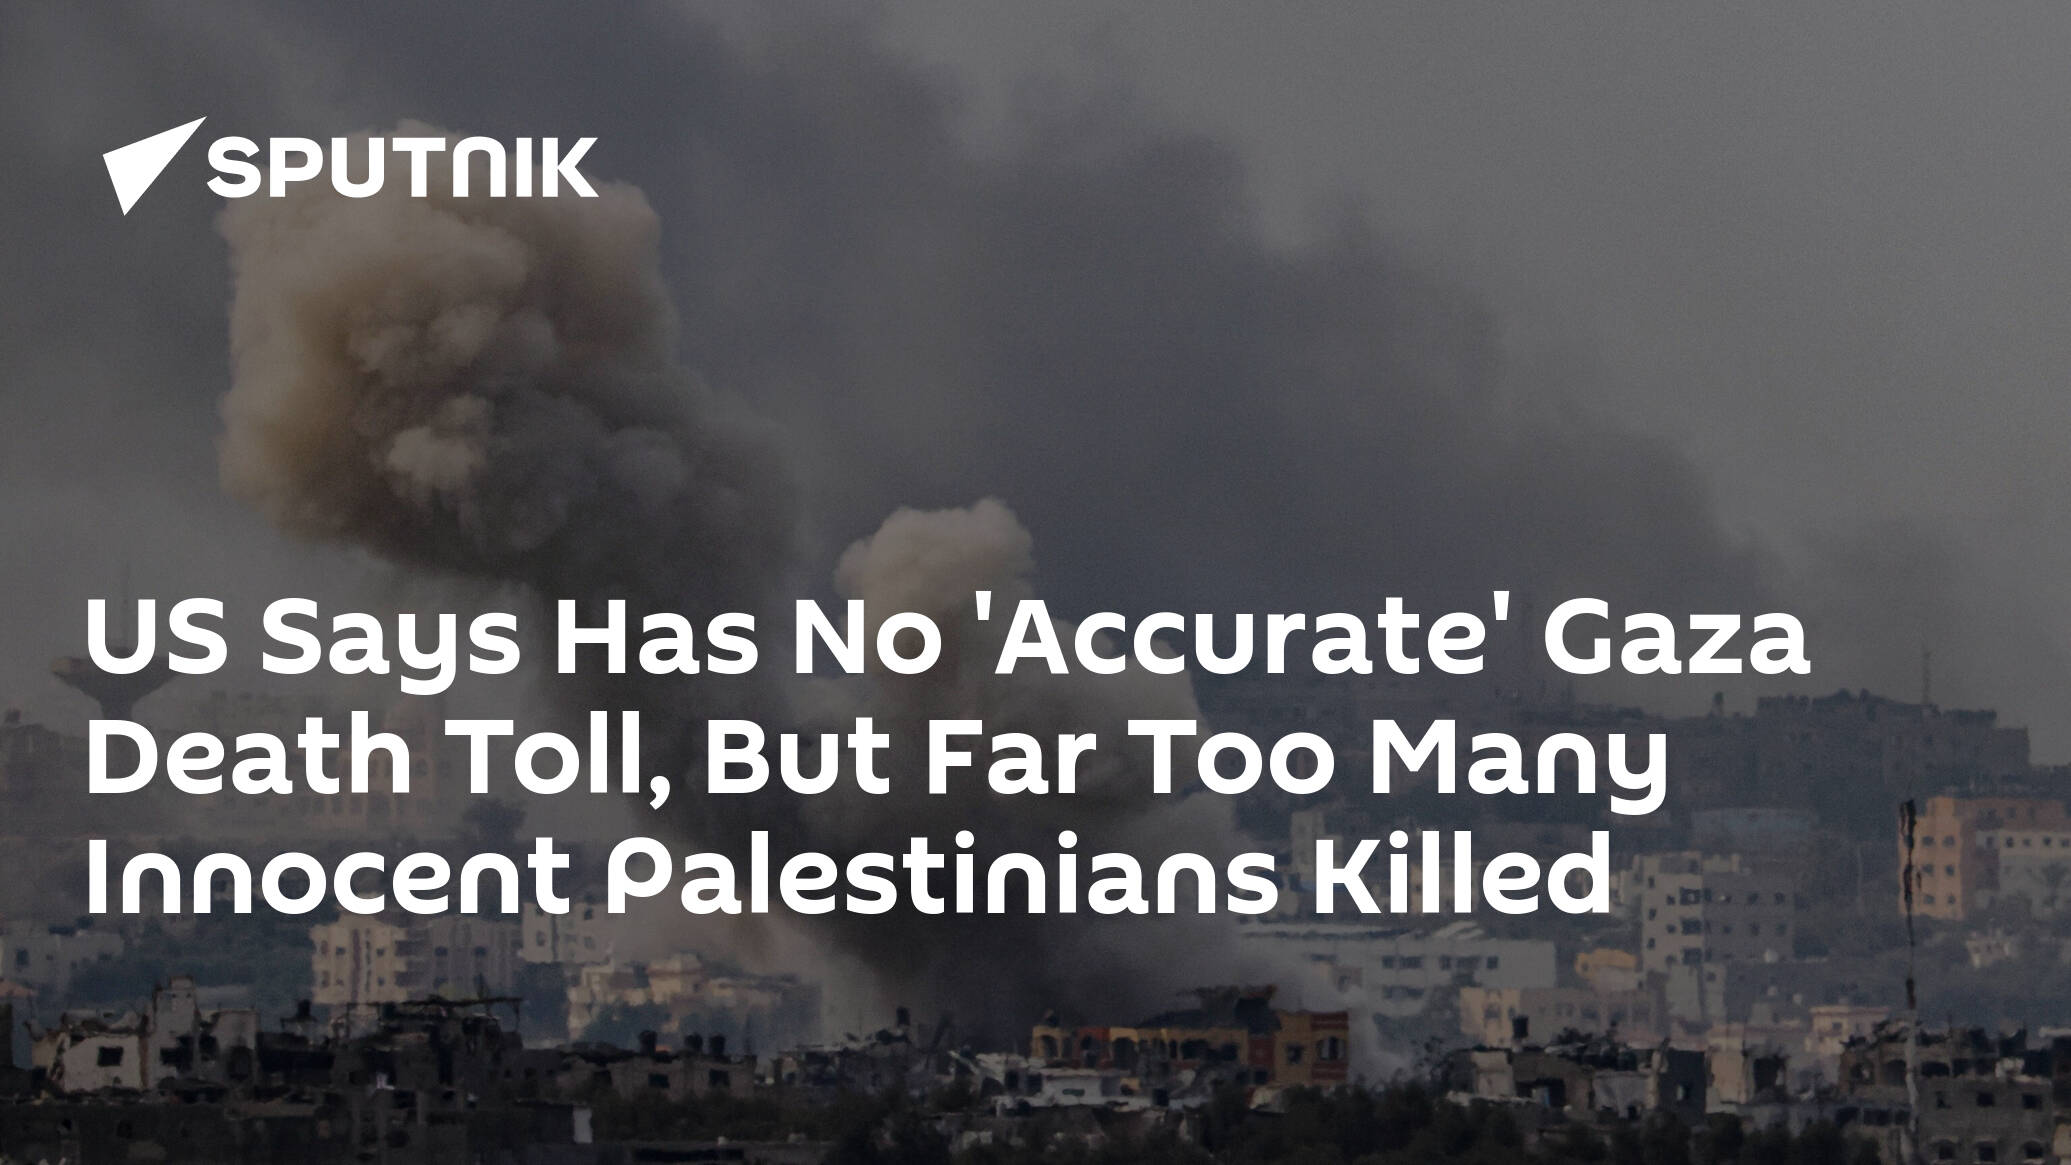 US Says Has No 'Accurate' Gaza Death Toll, But Far Too Many Innocent Palestinians Killed